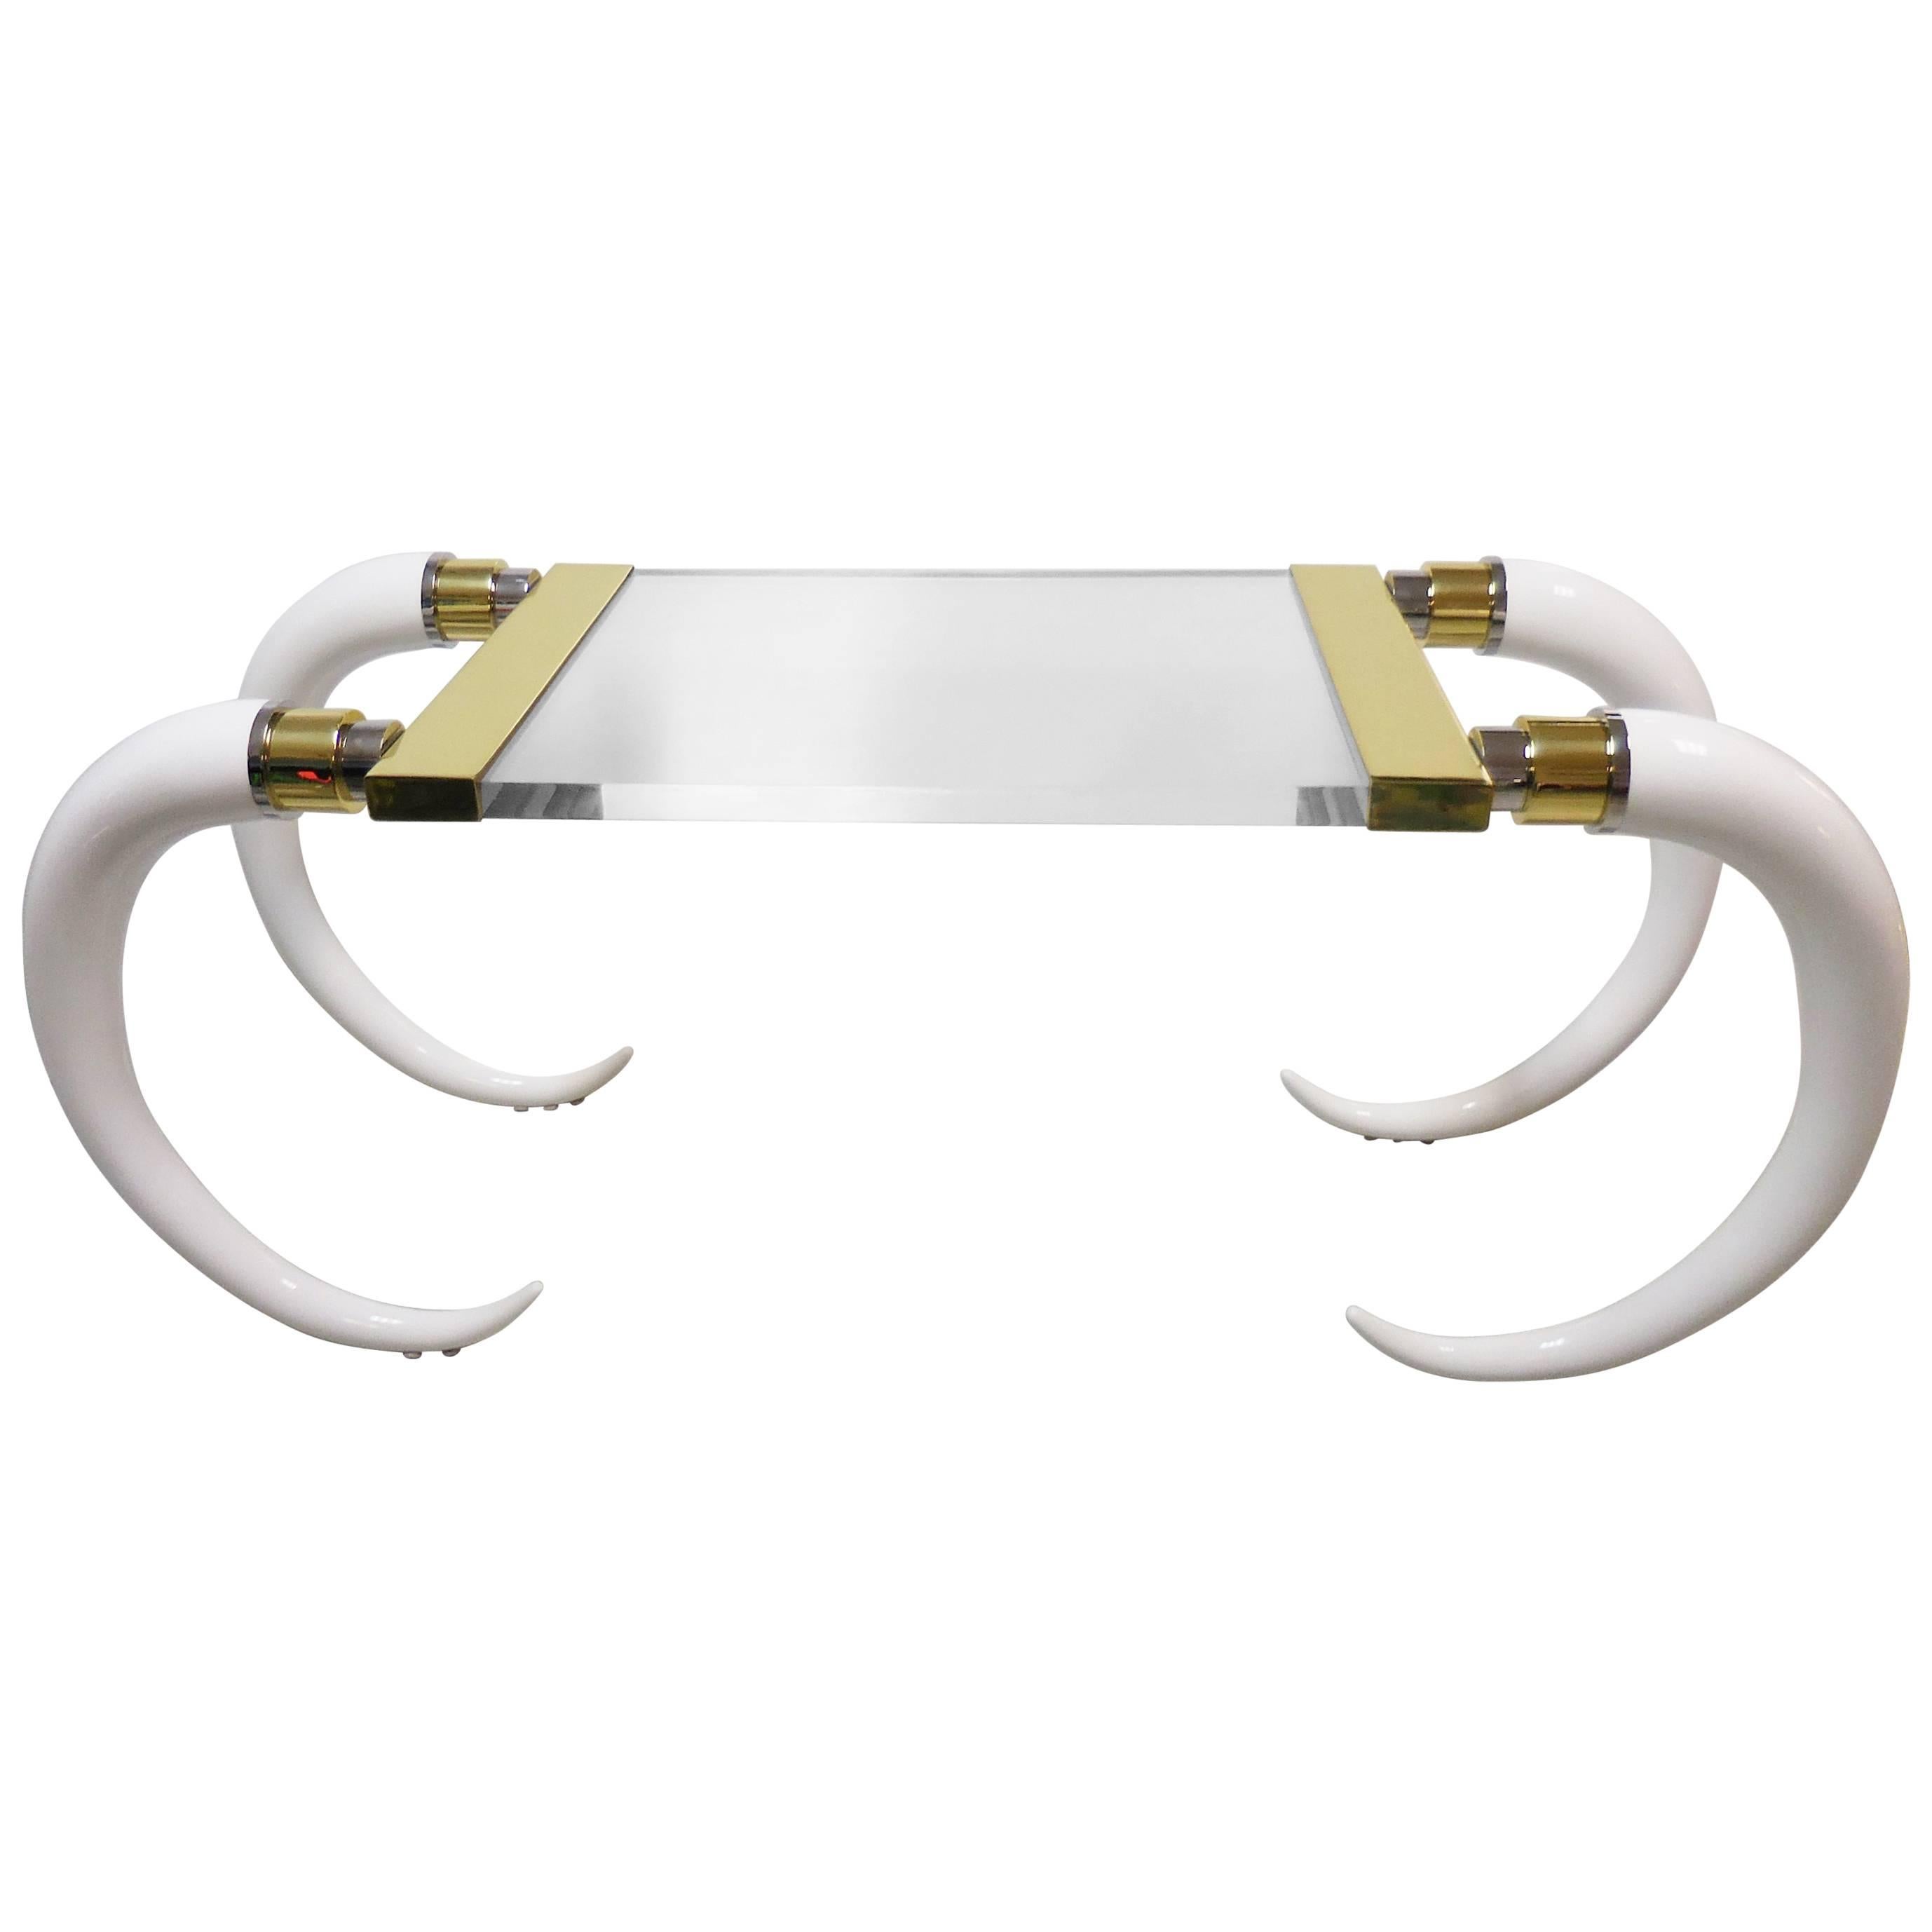 Faux Tusks Desk with Brass and Nickel Accents, 1970s